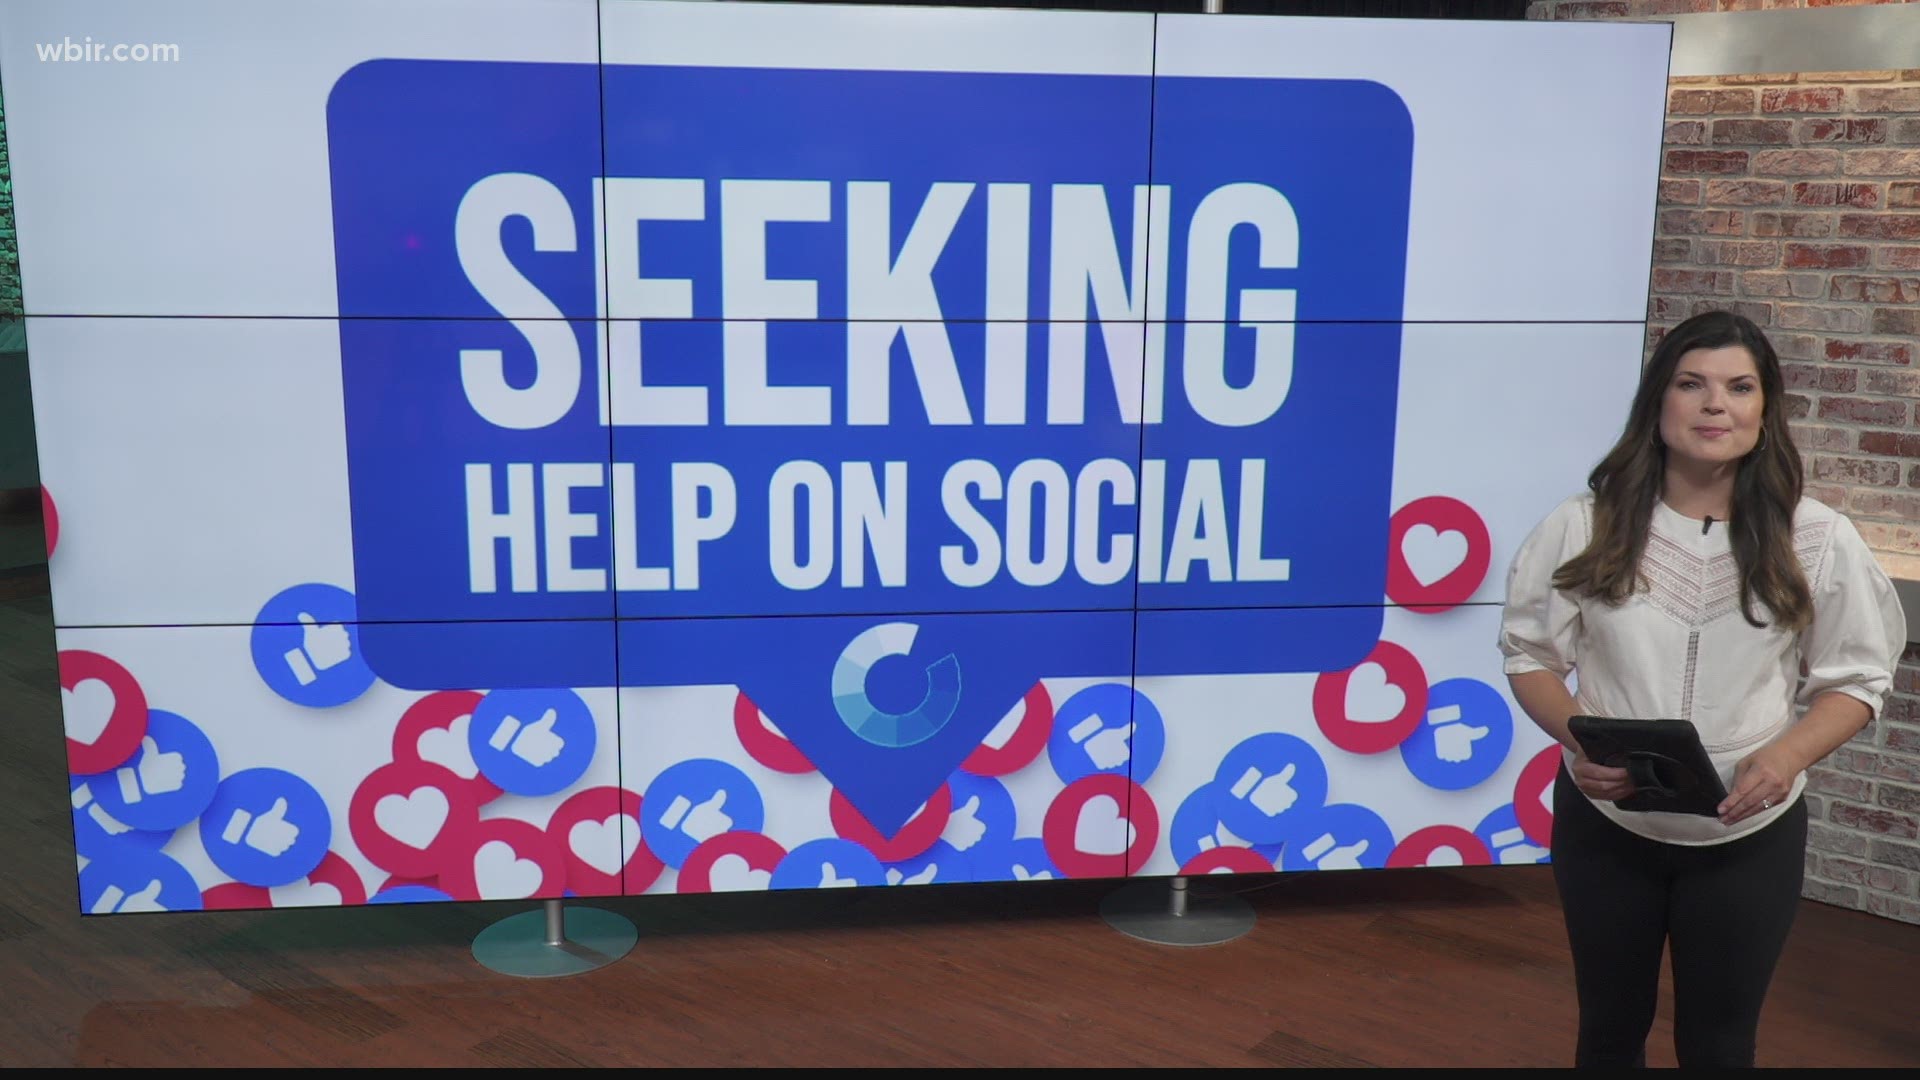 10News morning anchor, Heather Waliga, went to social media to find out what groups you're into and what you're asking about!